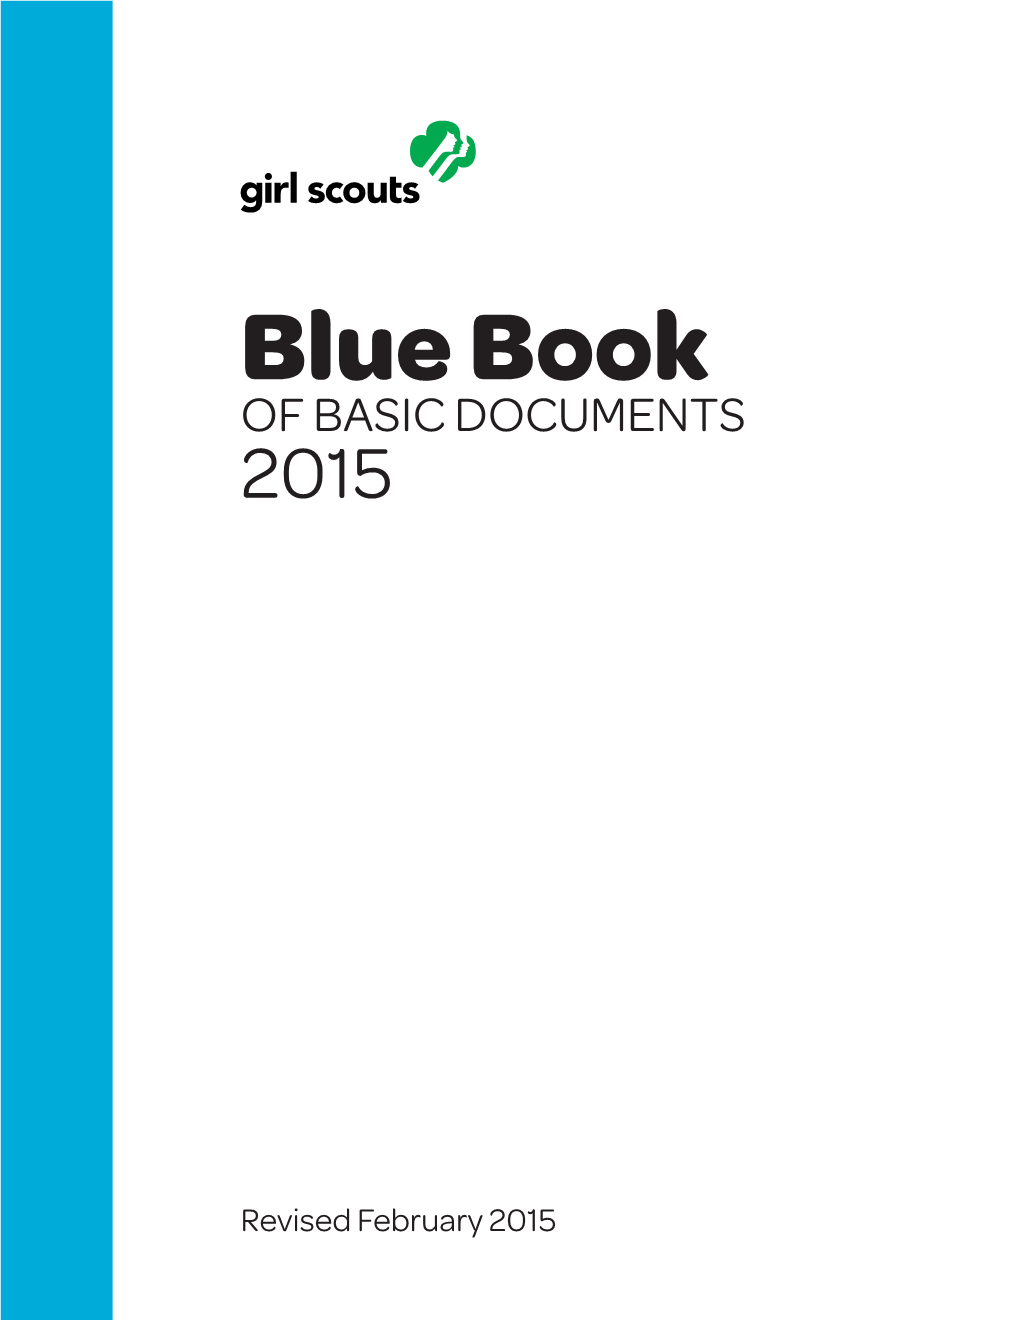 Blue Book of BASIC DOCUMENTS 2015